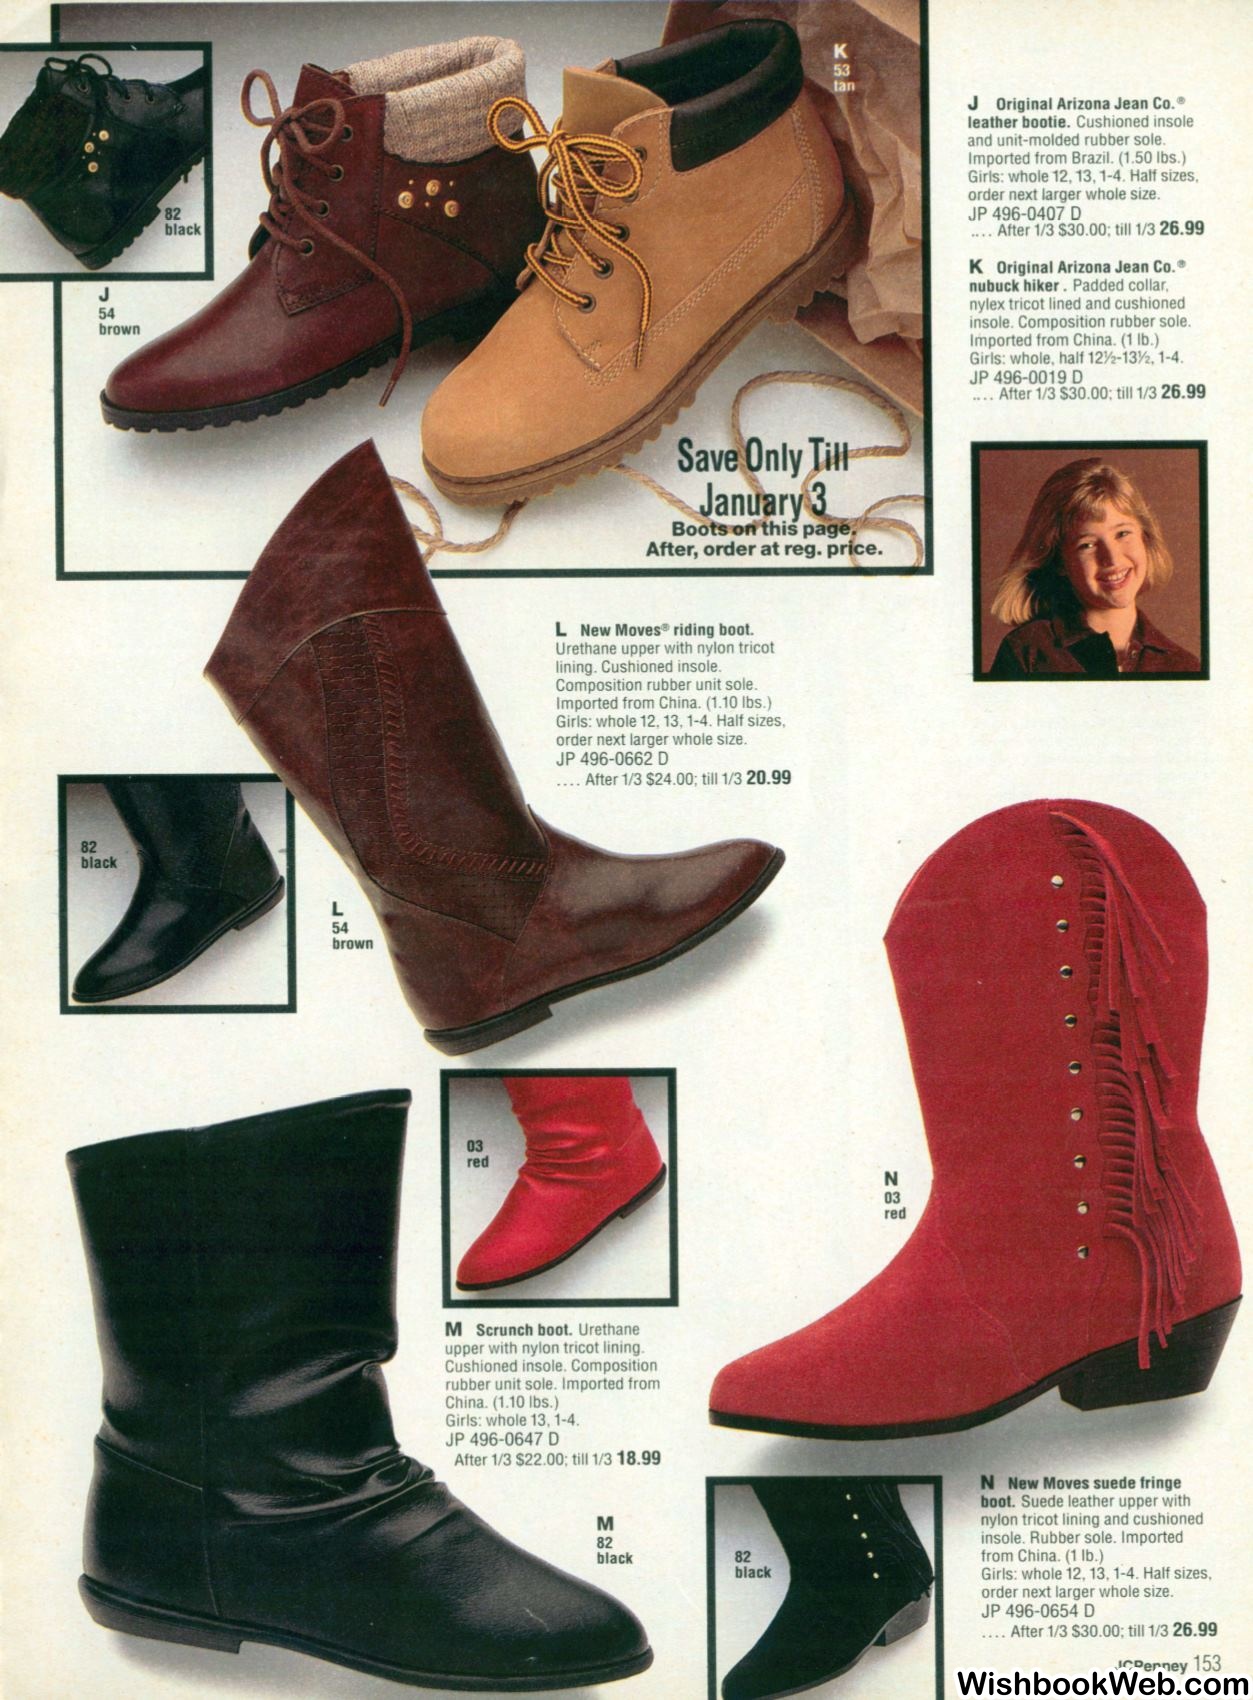 jcpenney fringe boots